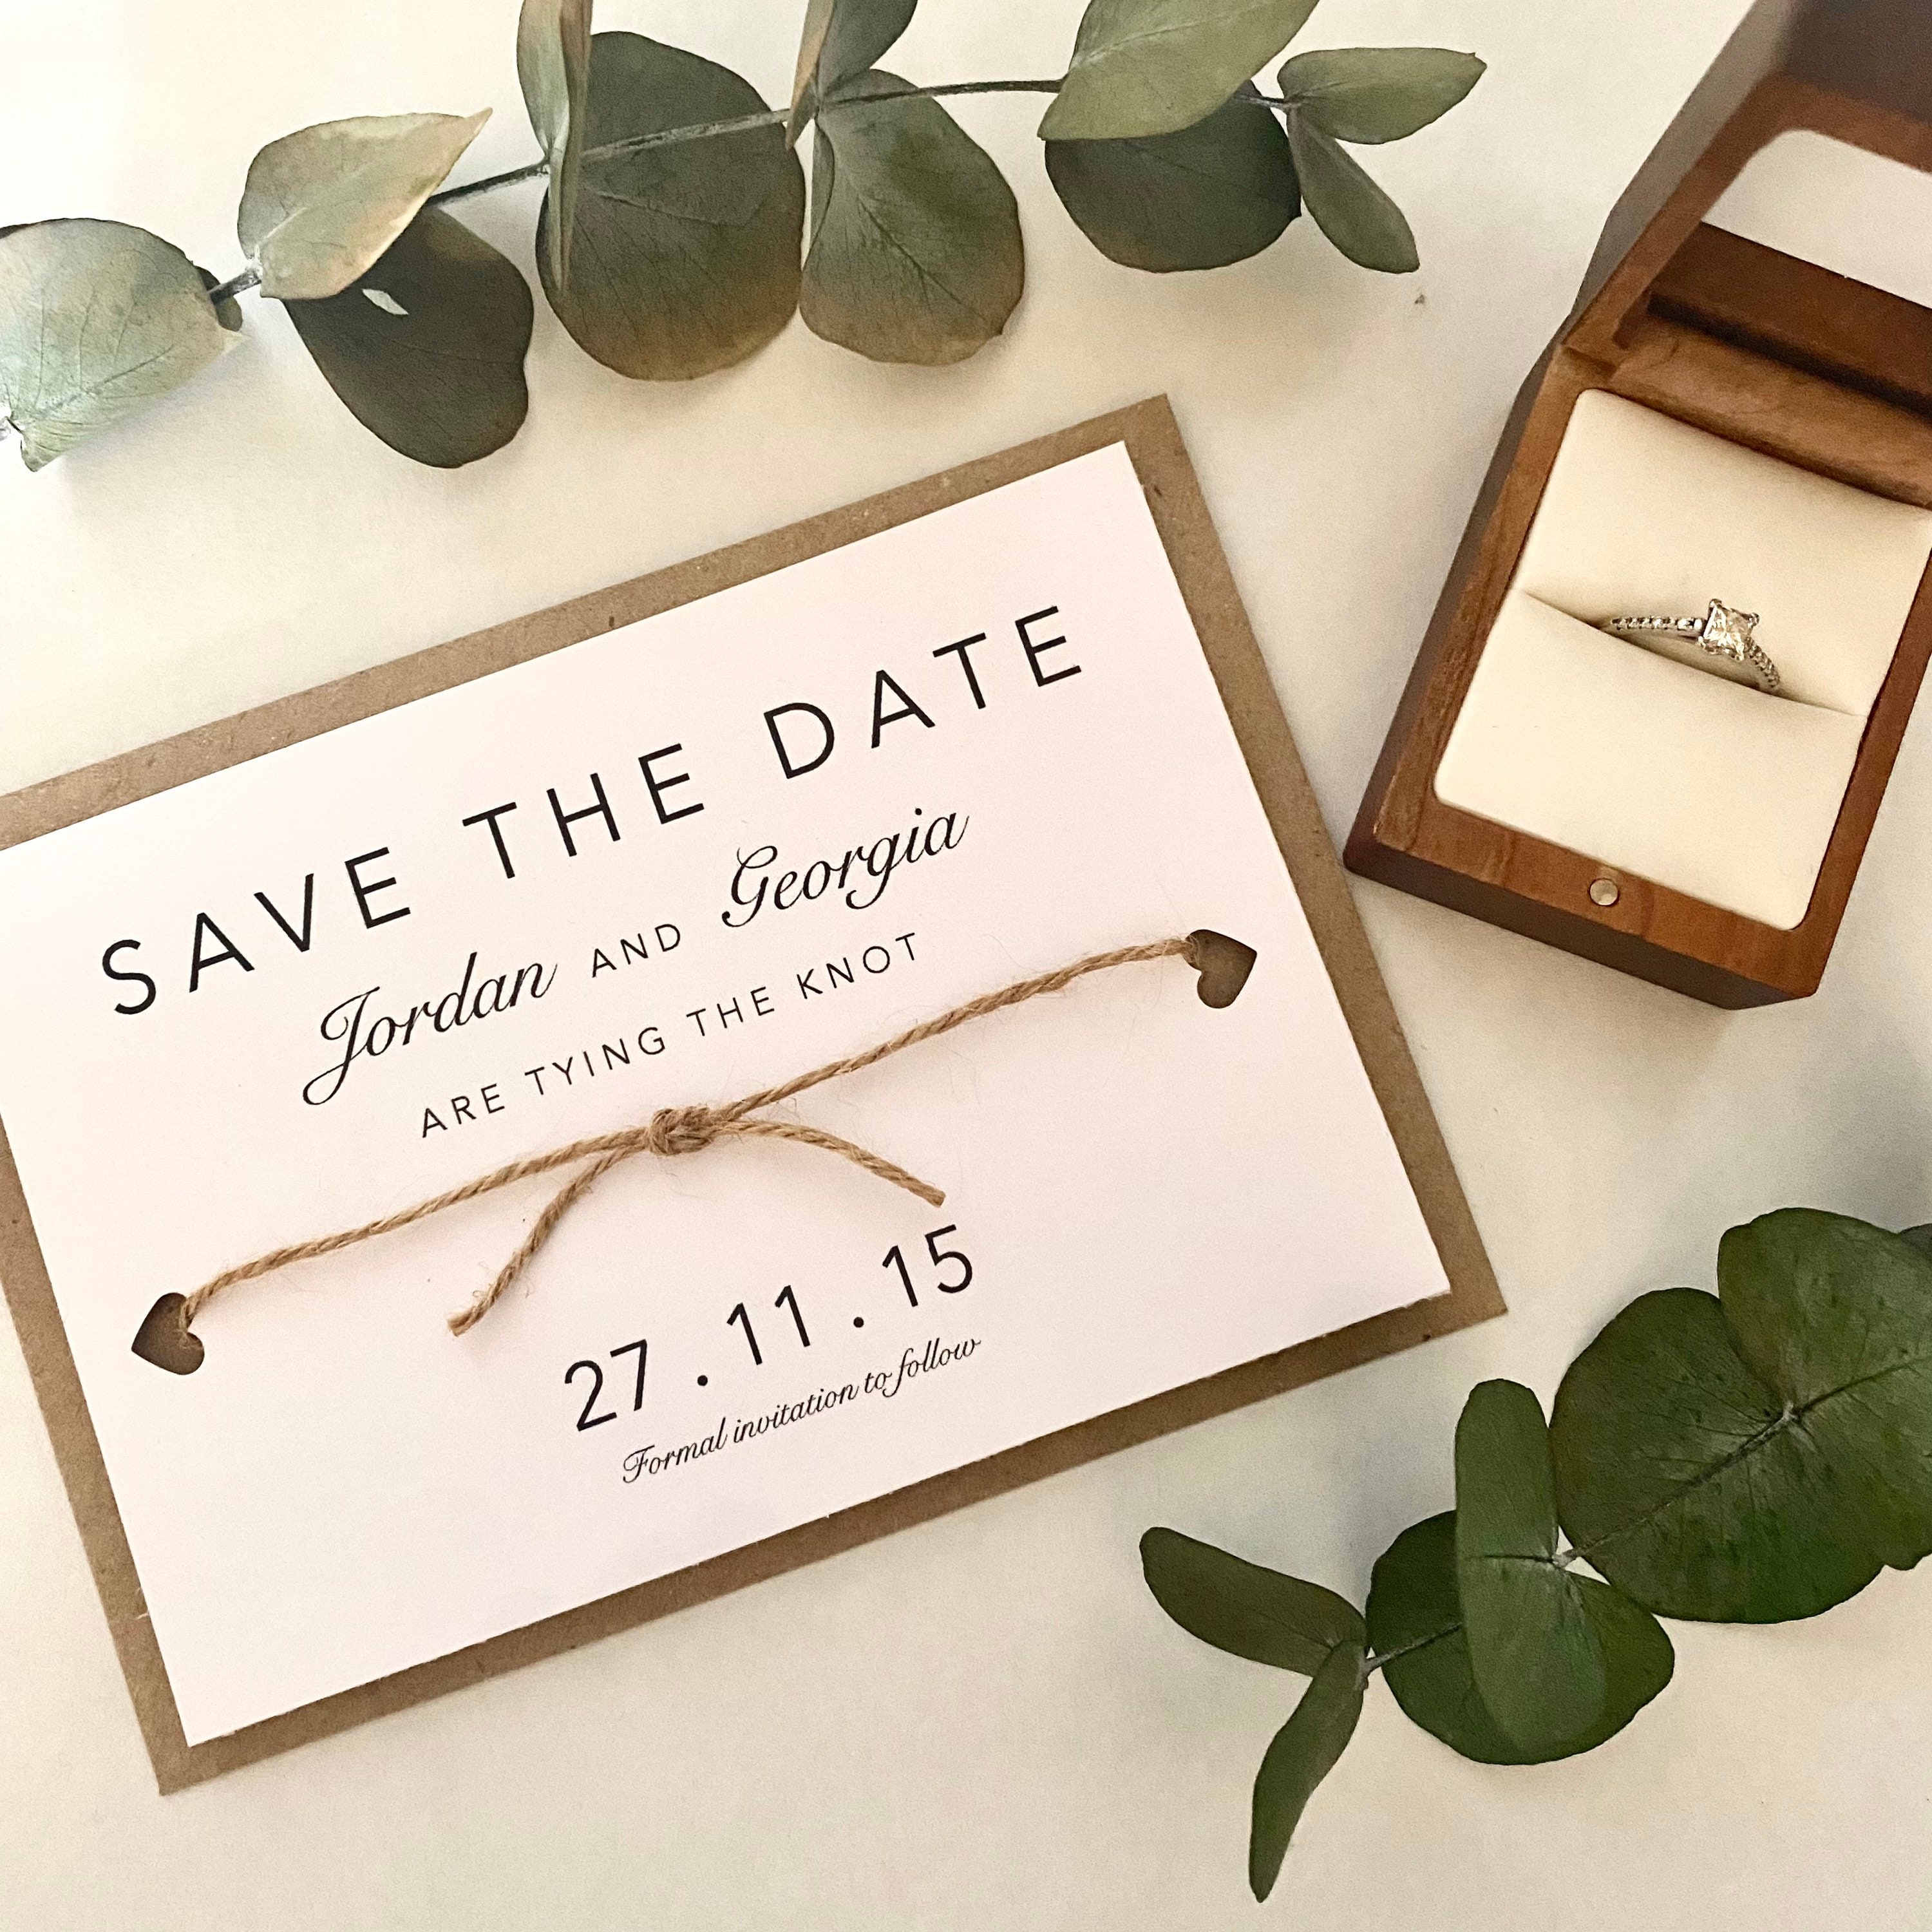 Tying the Knot Save The Date Evening Card Wedding Invitation with an Envelope 